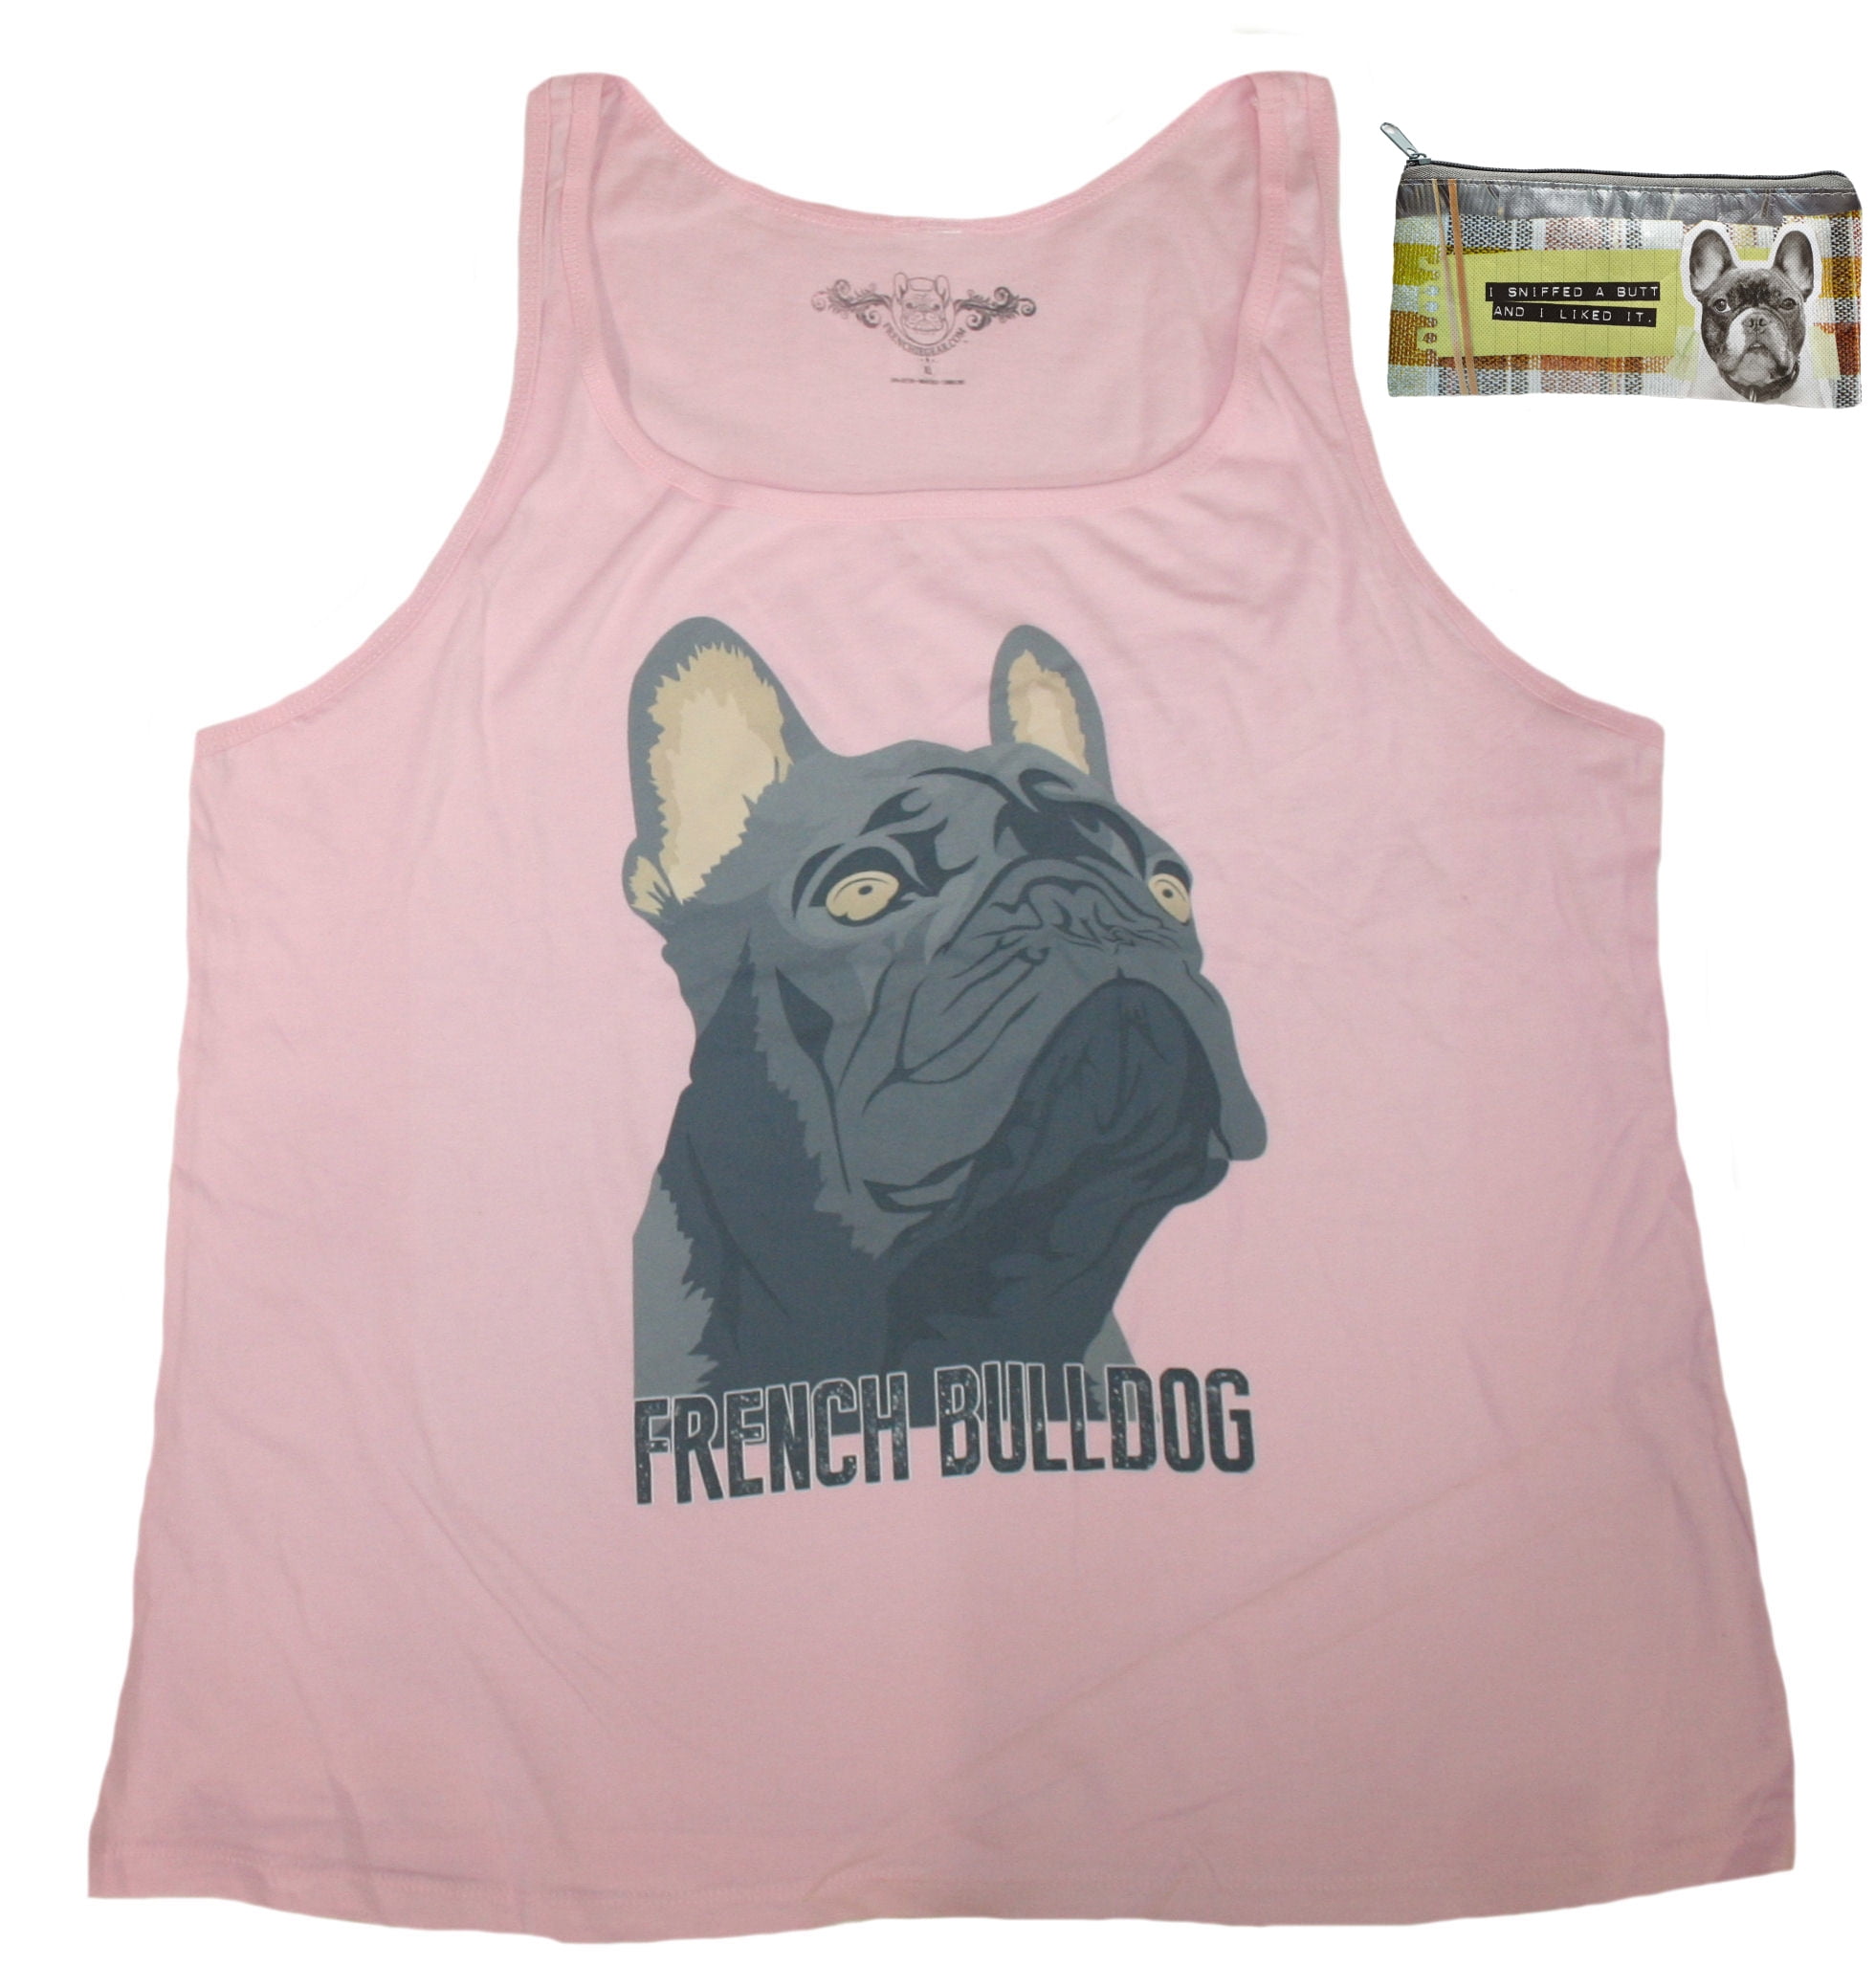 Womens French Bulldog Frenchie Fitness Workout Racerback Tank Tops 